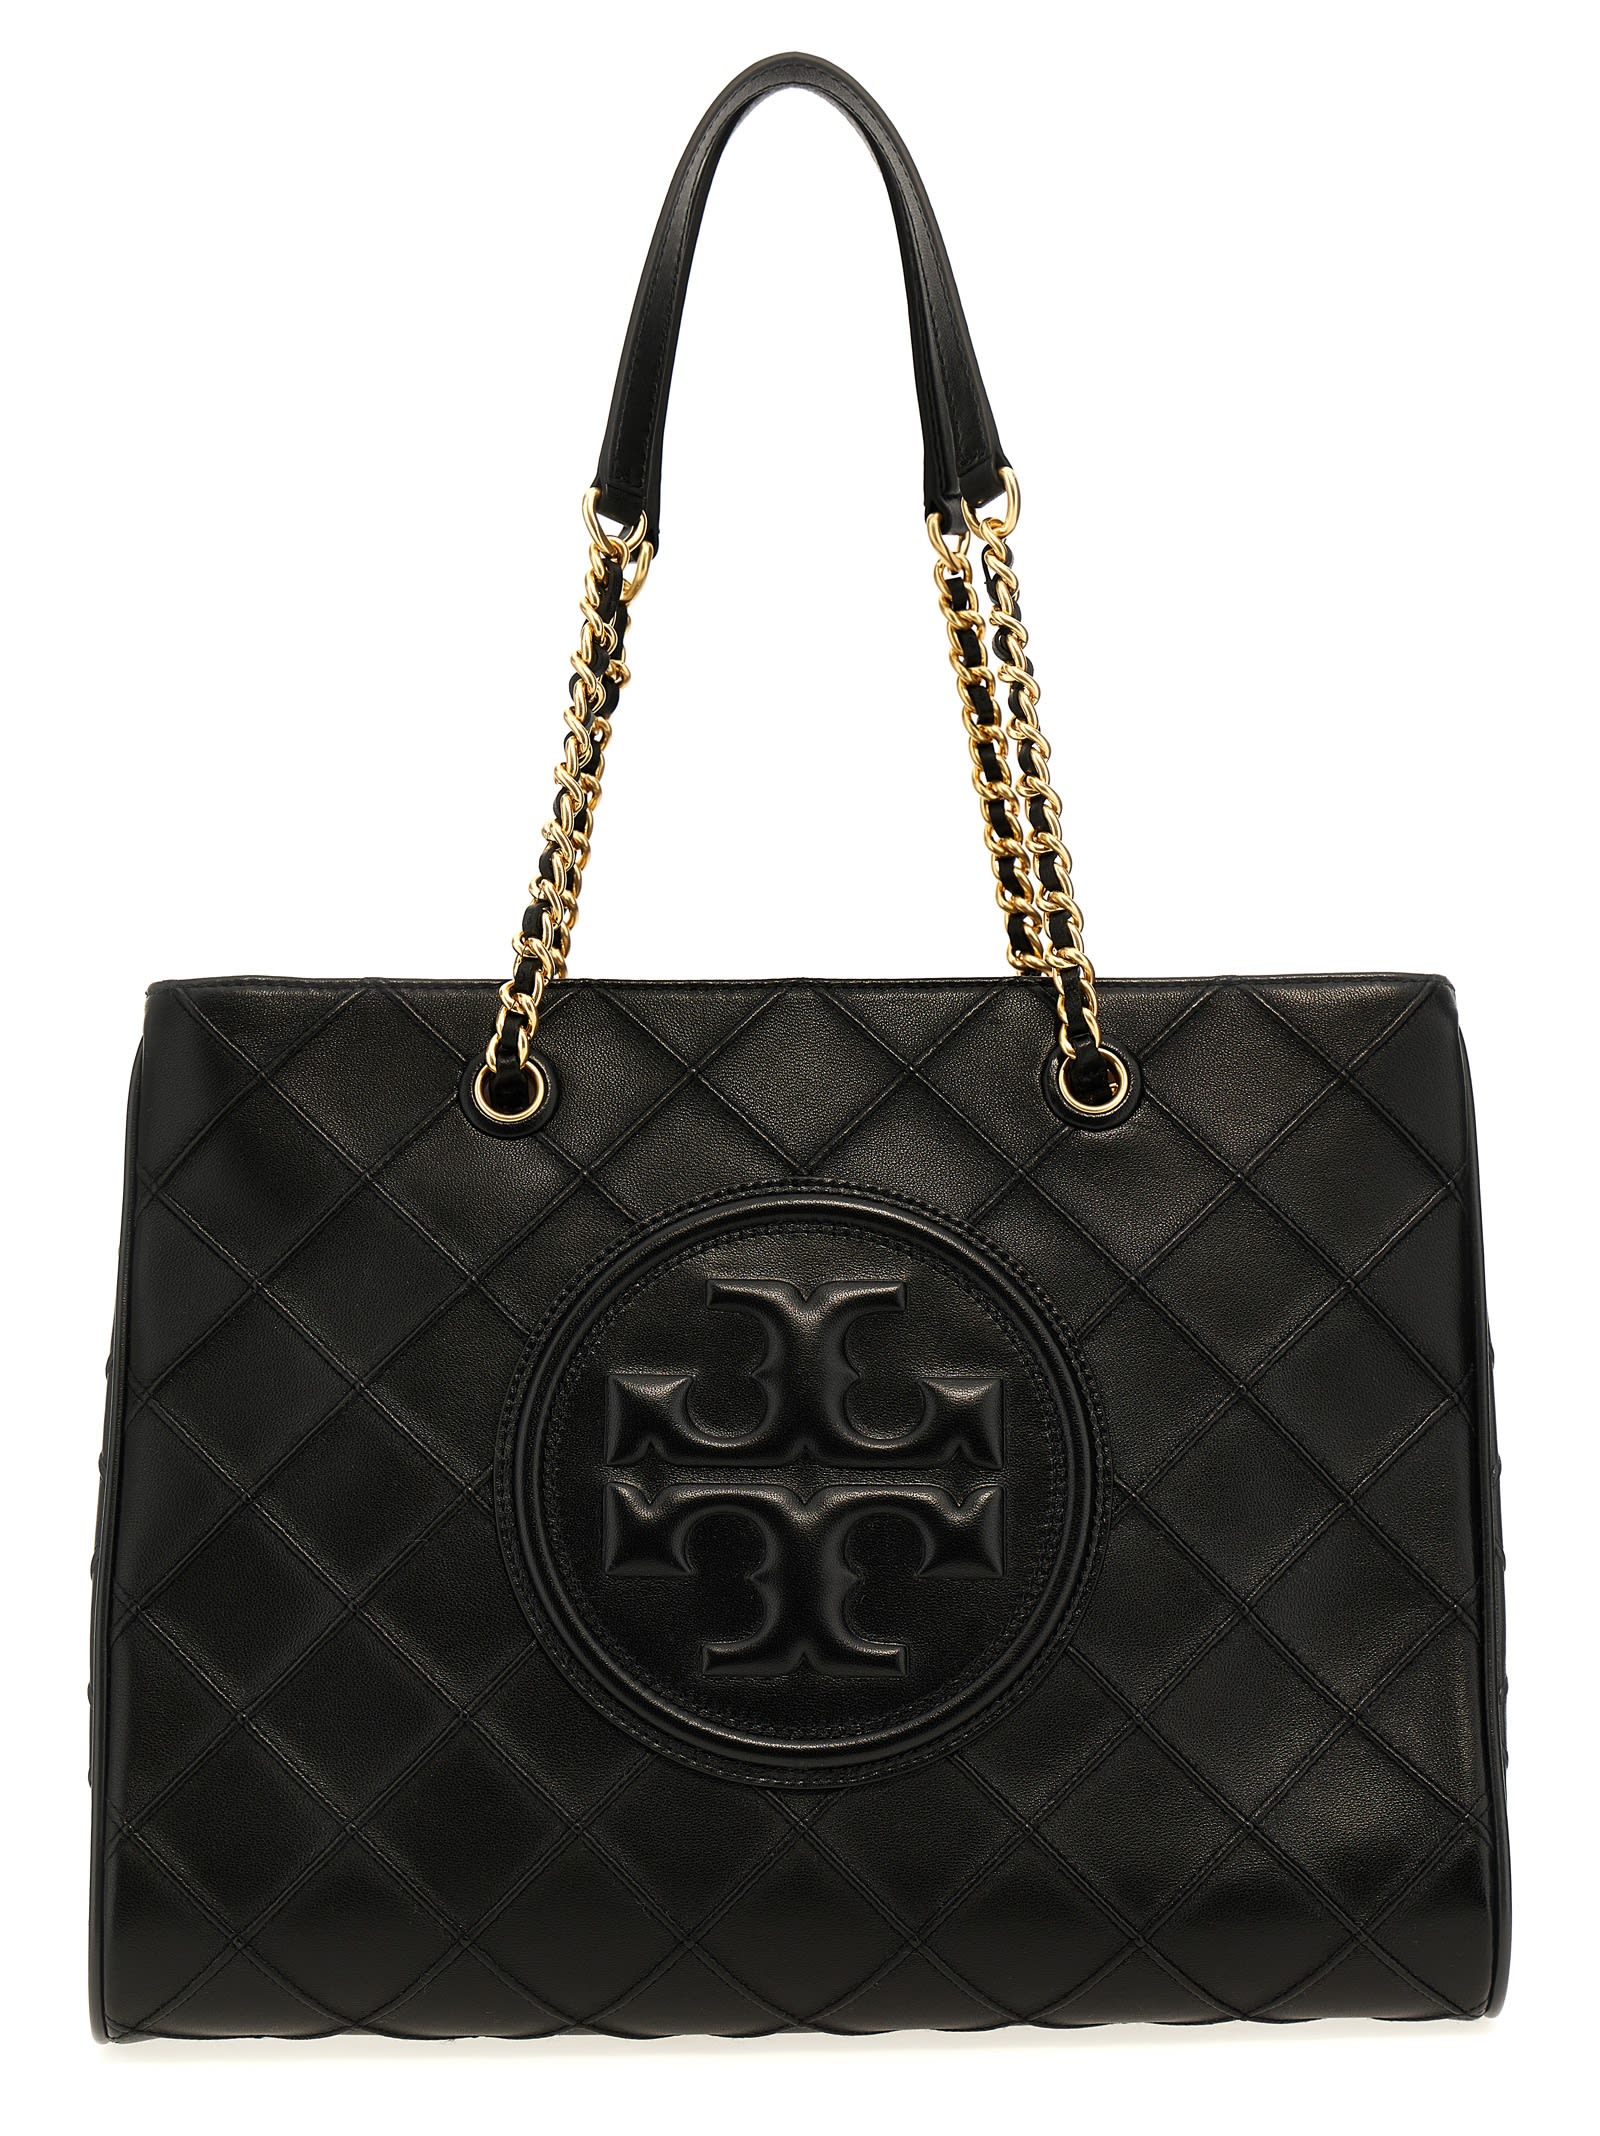 Tory Burch, Bags, Tory Burch Fleming Tote Large Brand New With Tag